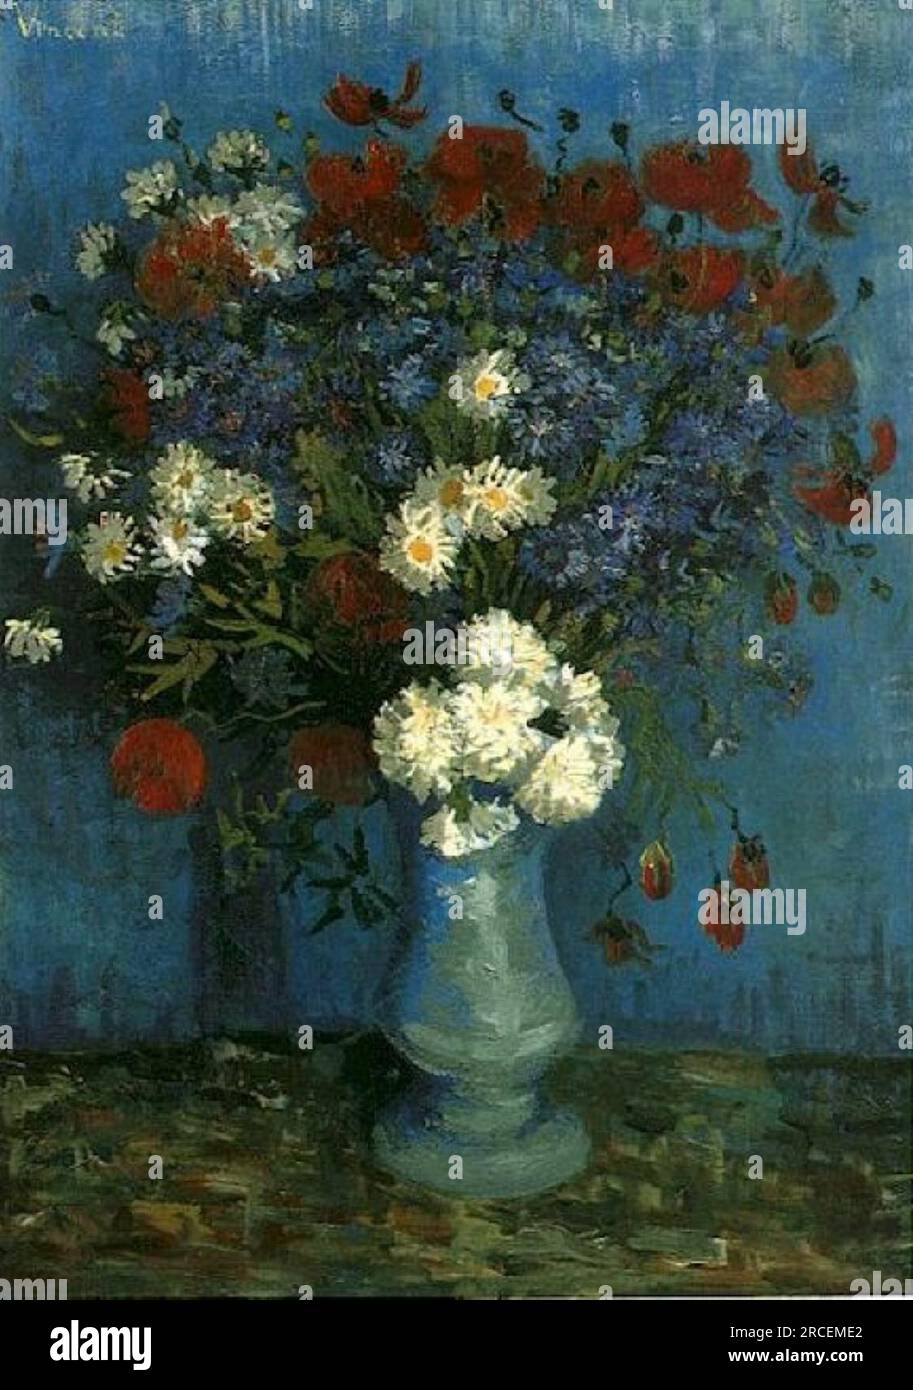 Still Life: Vase with Cornflowers and Poppies 1887; Paris, France by Vincent van Gogh Stock Photo